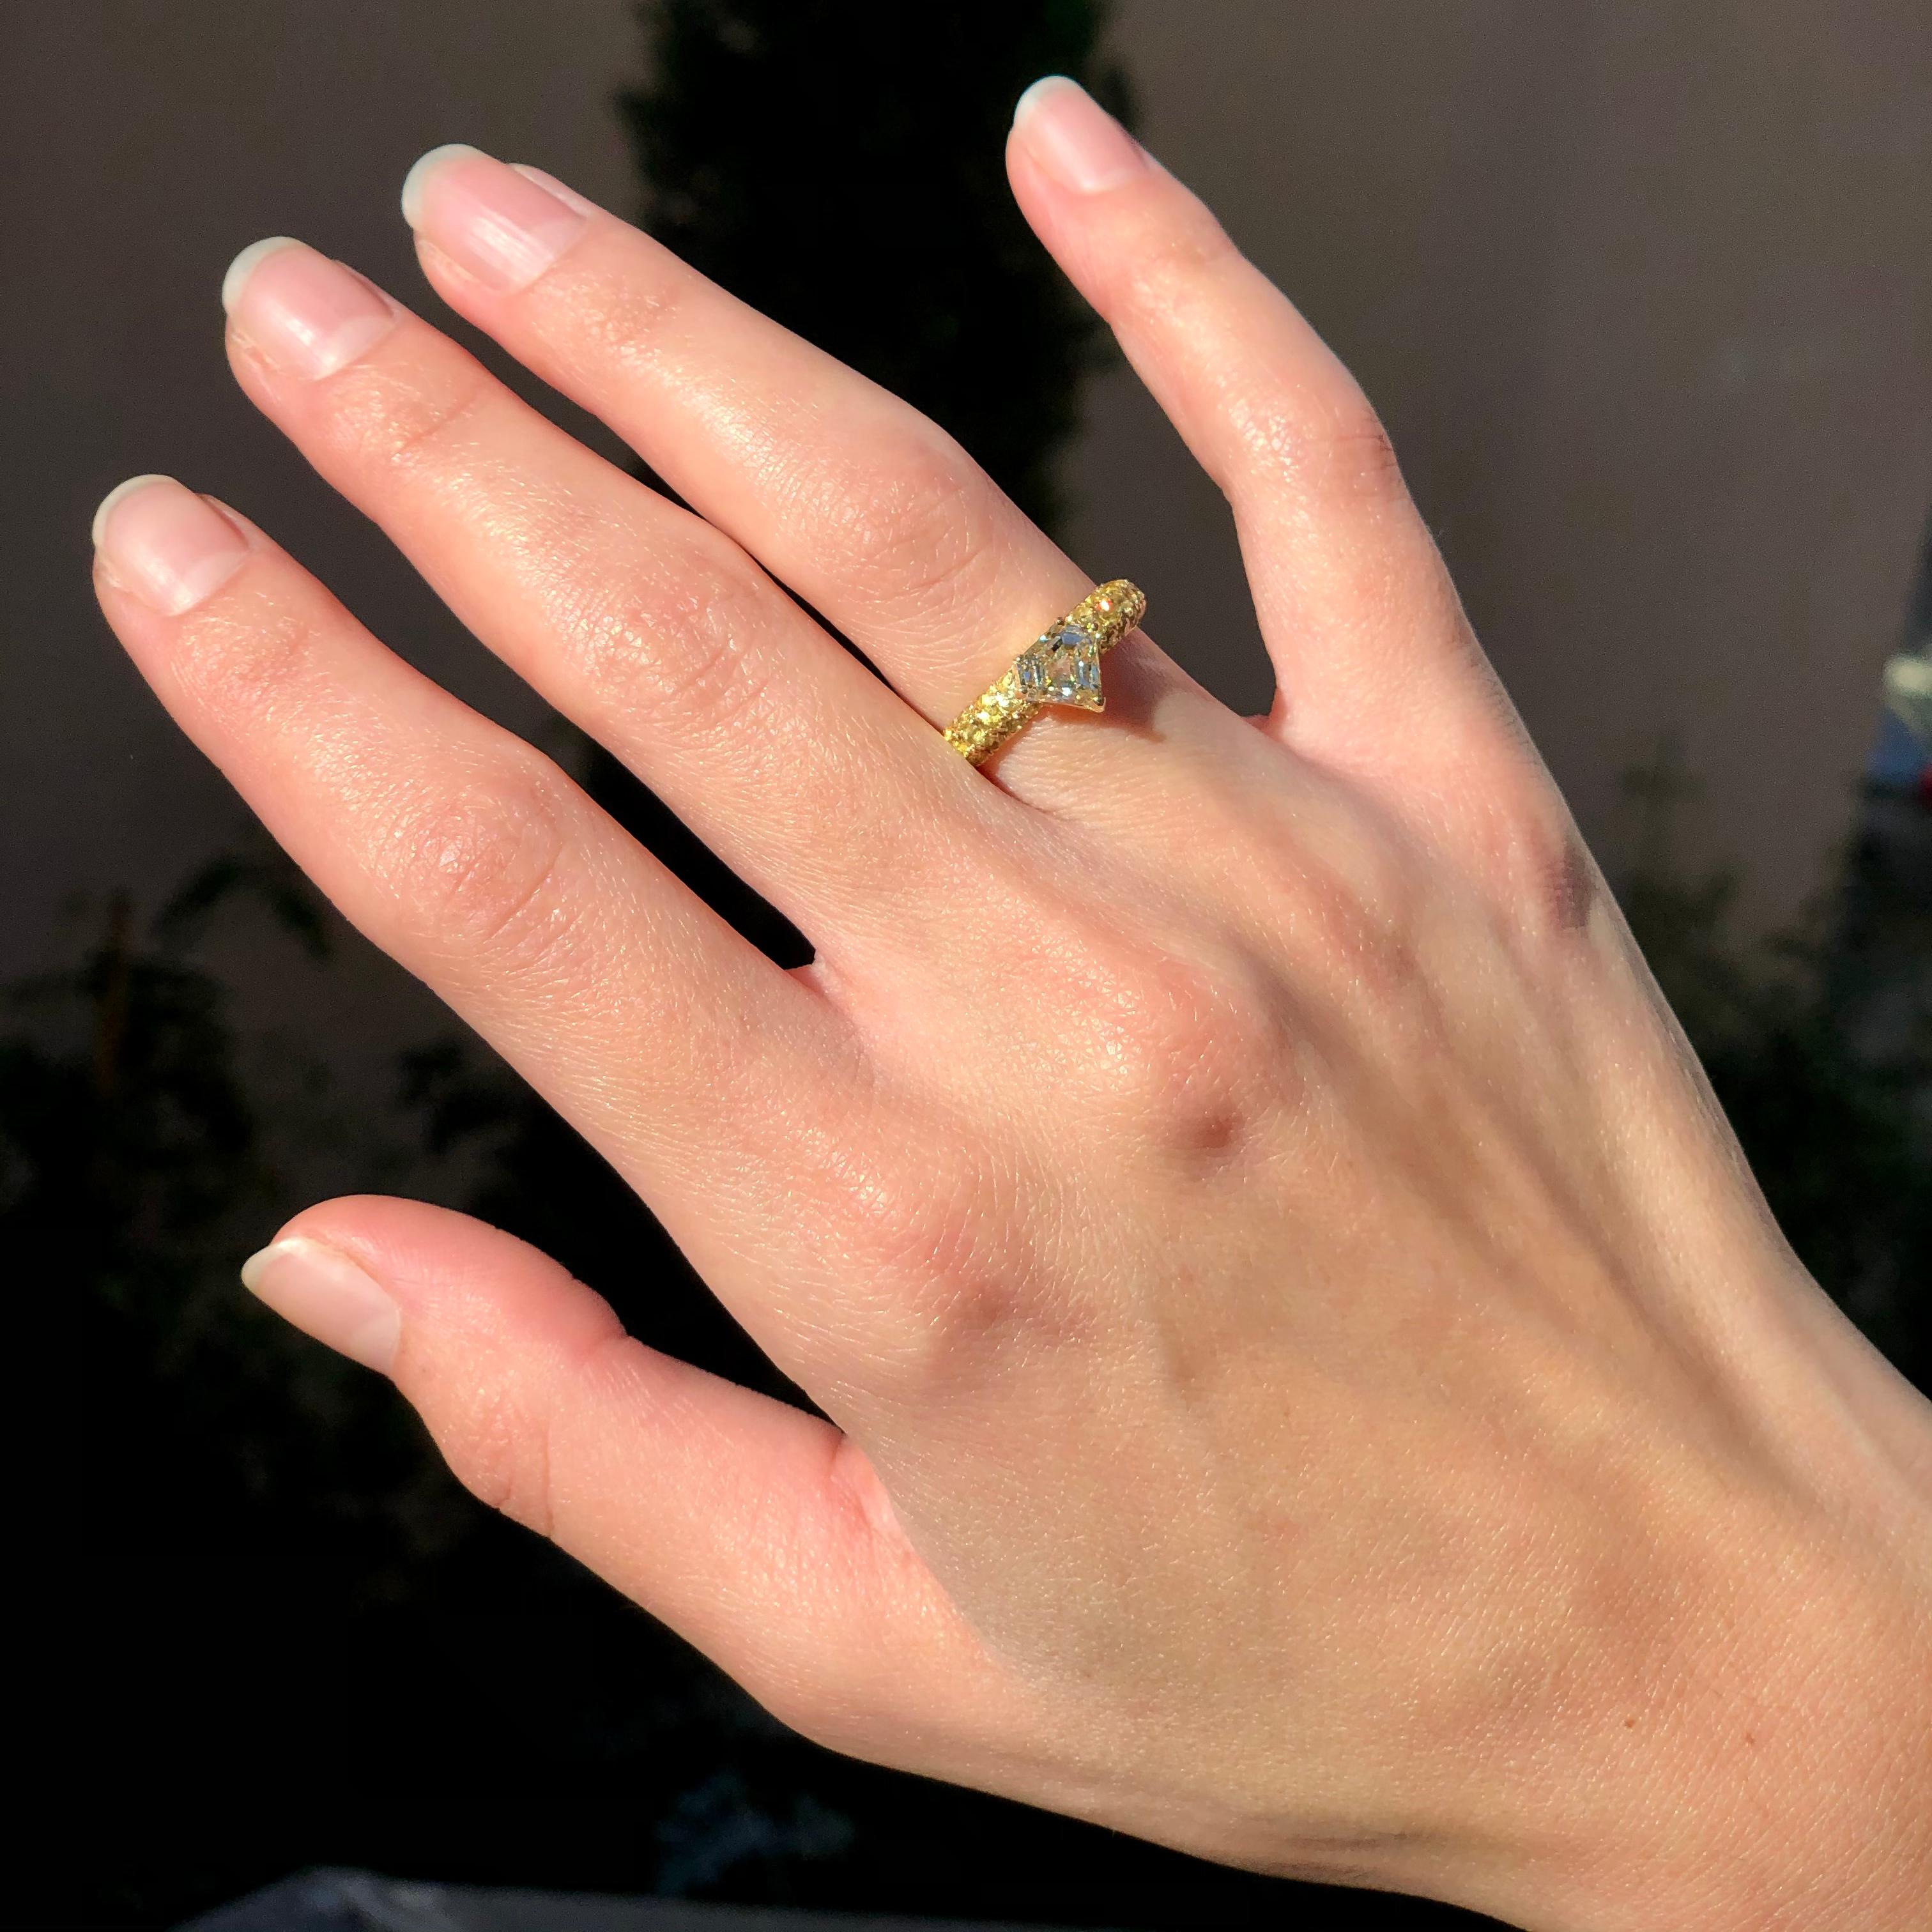 A modern & edgy 1.17ct one-of-a-kind diamond ring by Ralph Masri set on a yellow sapphire pavé (2.50ct) ring shank. A true stunner as a cocktail ring or as an engagement ring.

Size 52 (US 6) - can be resized.